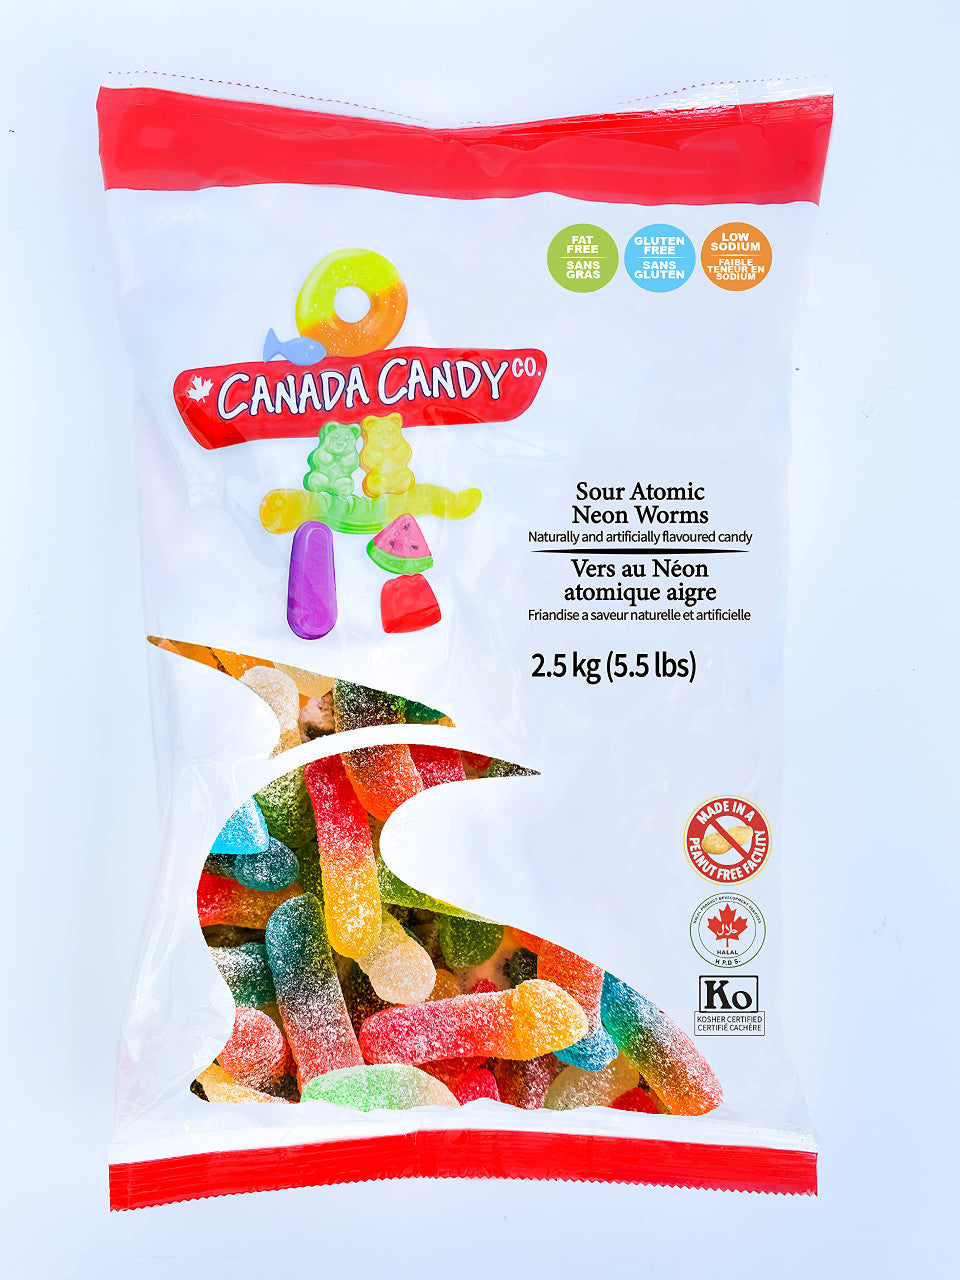 Canada Candy Sour Atomic Neon Worms 2.5kg (5.5 lbs) {Imported from Canada}